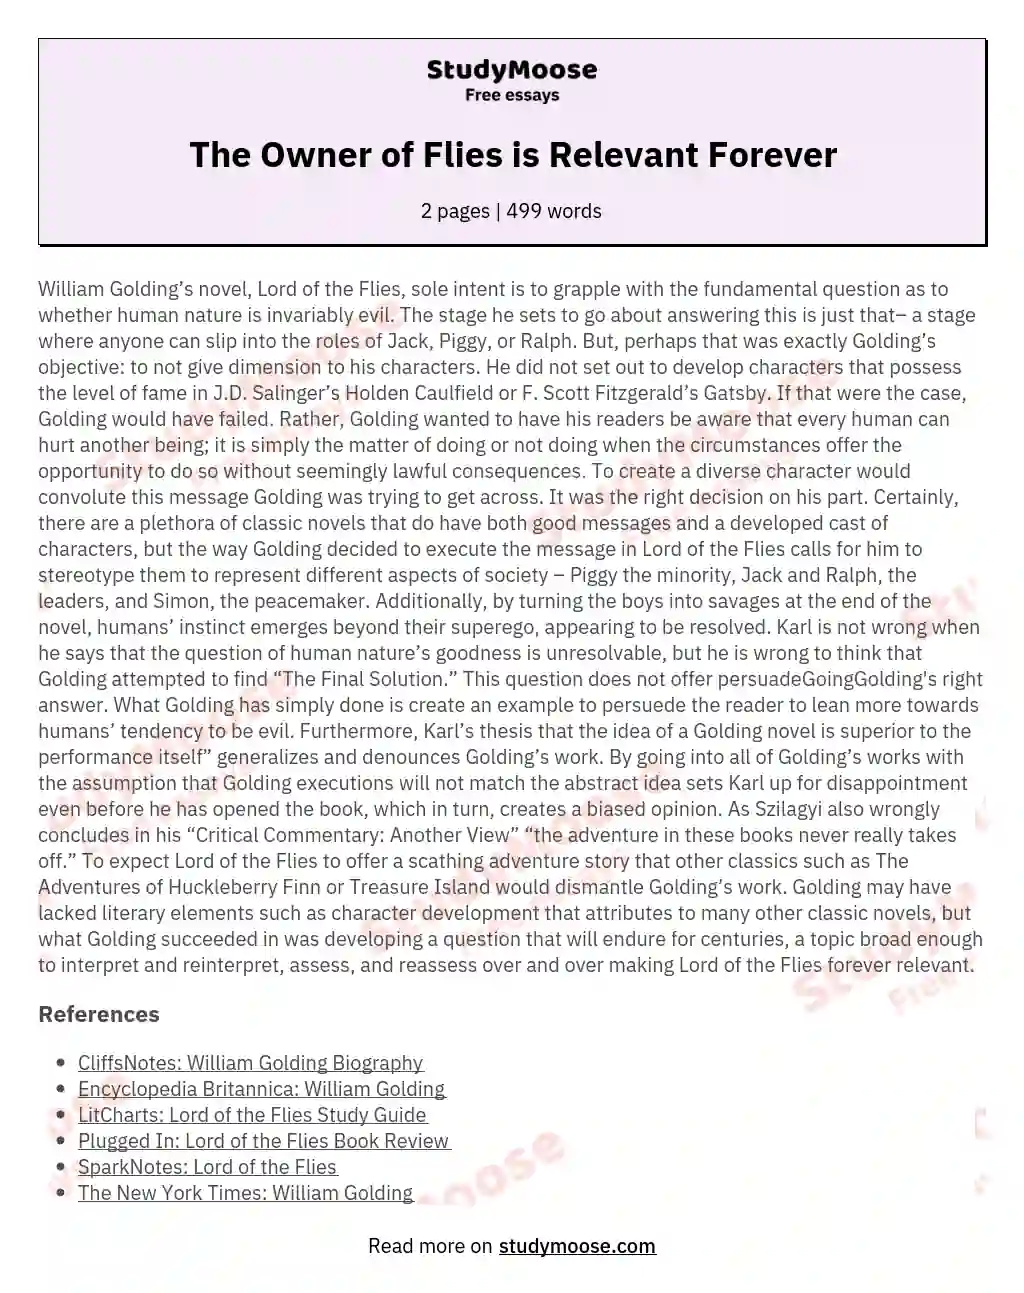 The Owner of Flies is Relevant Forever essay